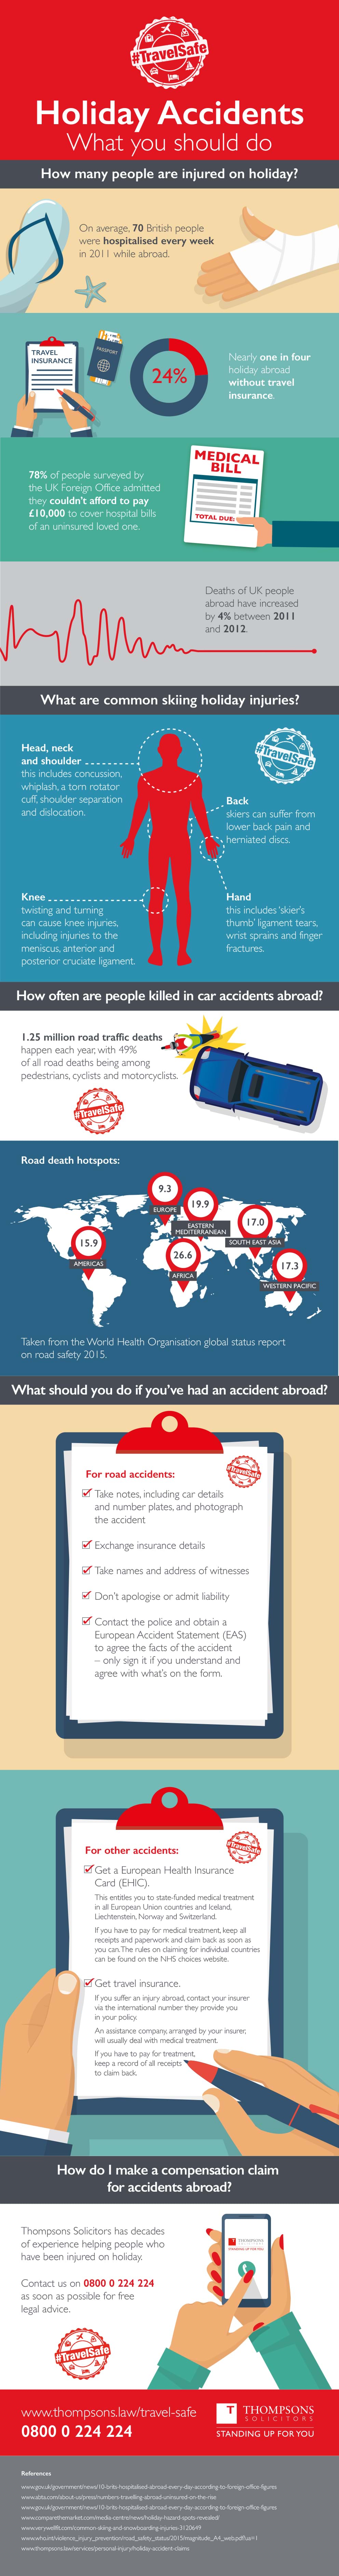 #TravelSafe infographic on avoiding a beach injury